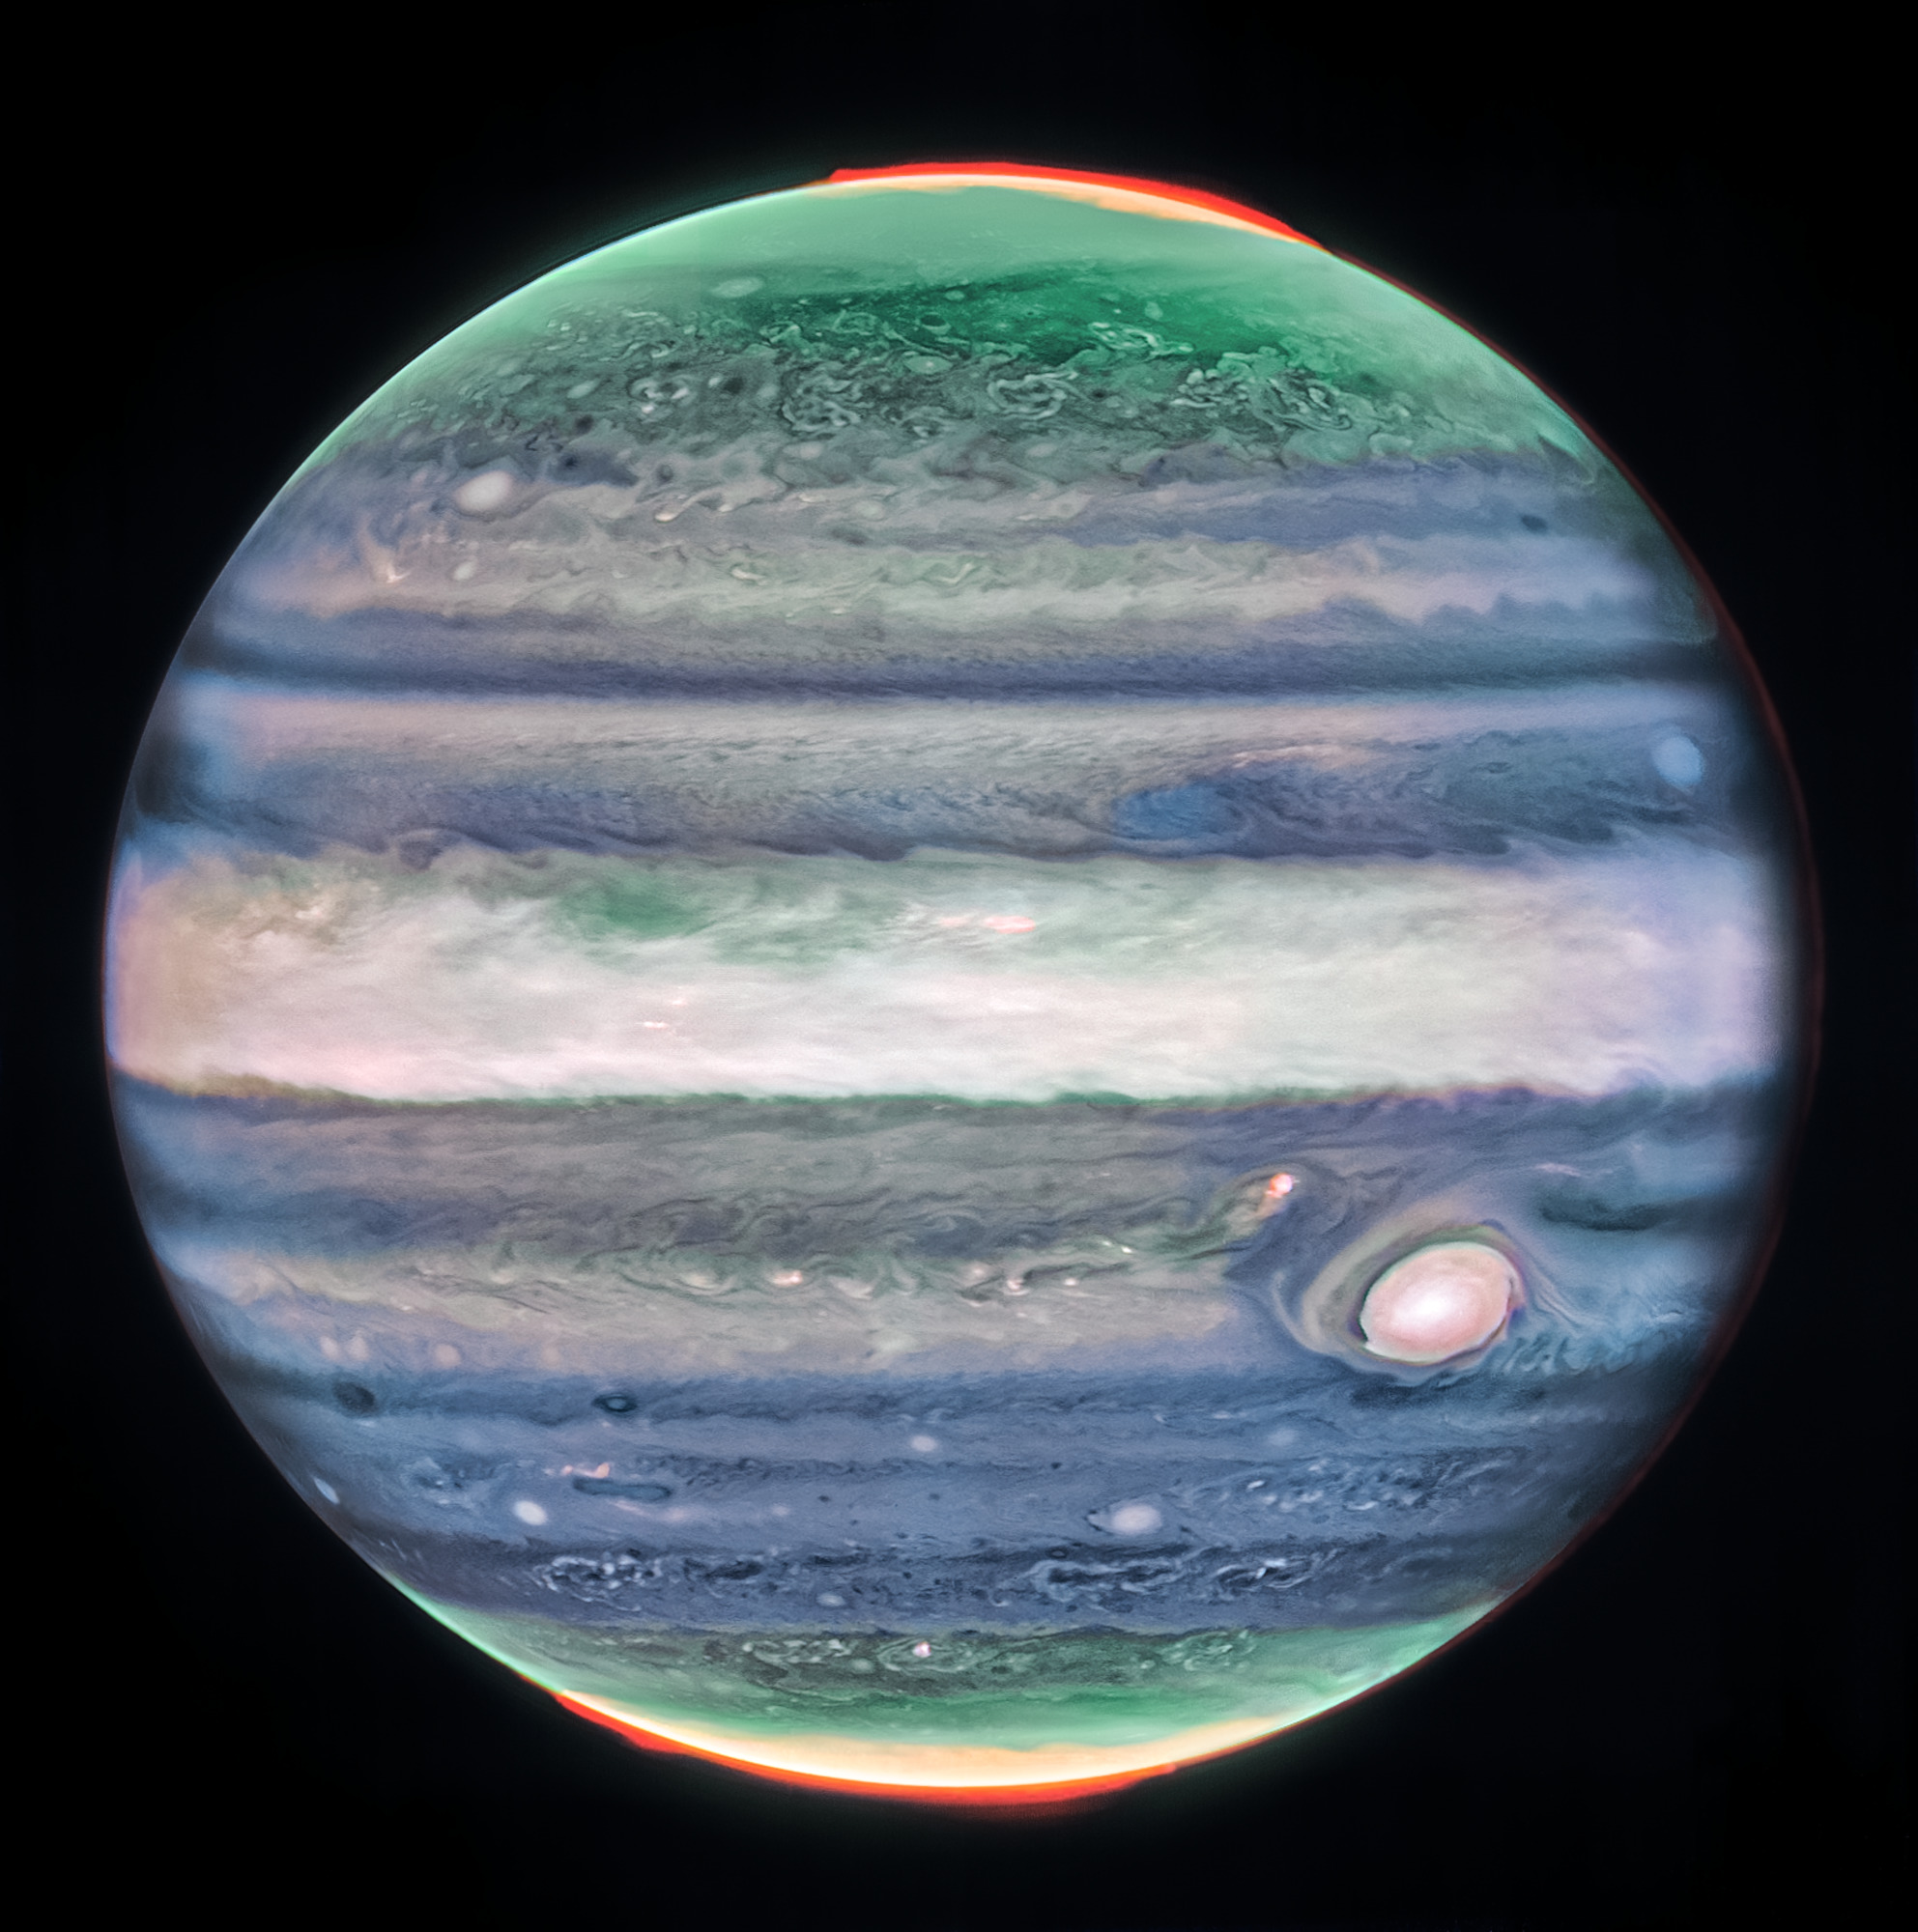 Jupiter dominates the black background of space. The image is a composite, and shows Jupiter in enhanced color, featuring the planet’s famous Great Red Spot, which appears white with light pink around the edges. The planet is striated with swirling horizontal stripes of green, periwinkle, light pink, and cream. Horizontally across the equator is a wide cream-colored band, whose height extends about 1/7 of the planet. This is the planet’s equatorial zone. The stripes across the planet interact and mix at their edges. Along both of the northern and southern poles, the planet glows in green. Bright red auroras glow just above the planet’s surface at both poles.